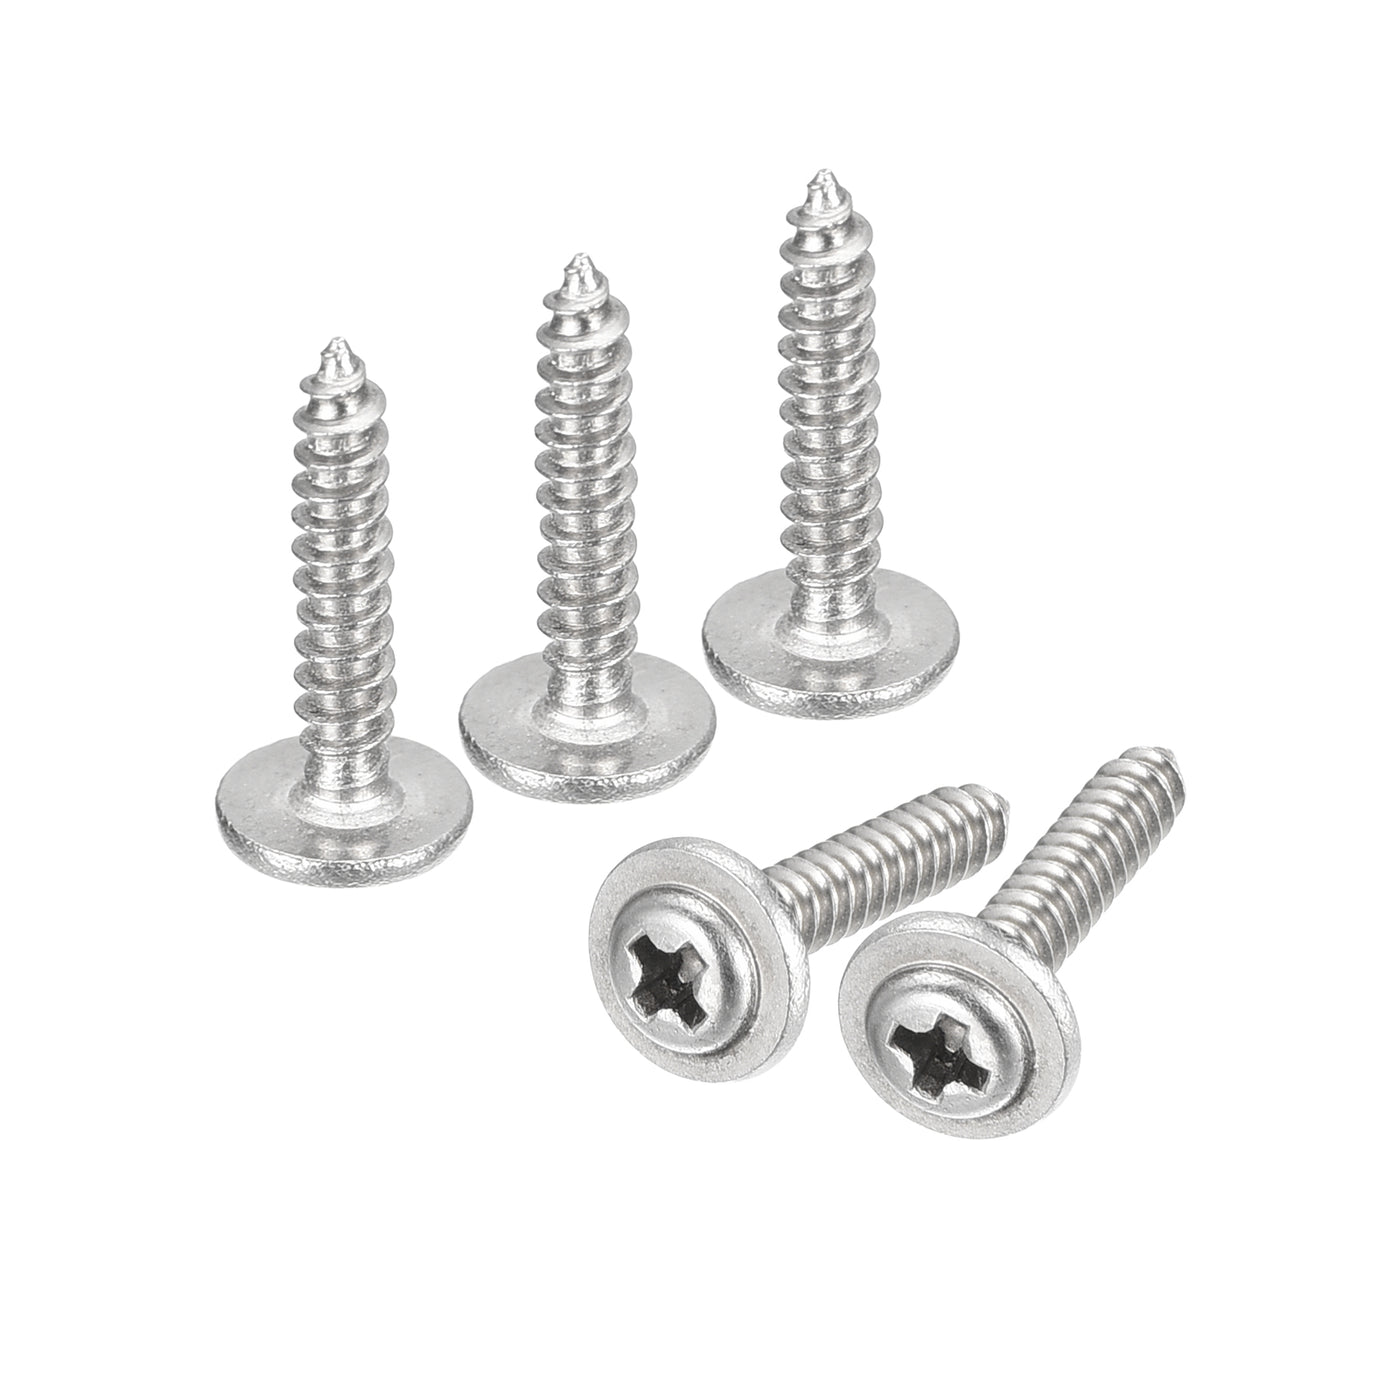 uxcell Uxcell ST2.3x12mm Phillips Pan Head Self-tapping Screw with Washer, 100pcs - 304 Stainless Steel Wood Screw Full Thread (Silver)